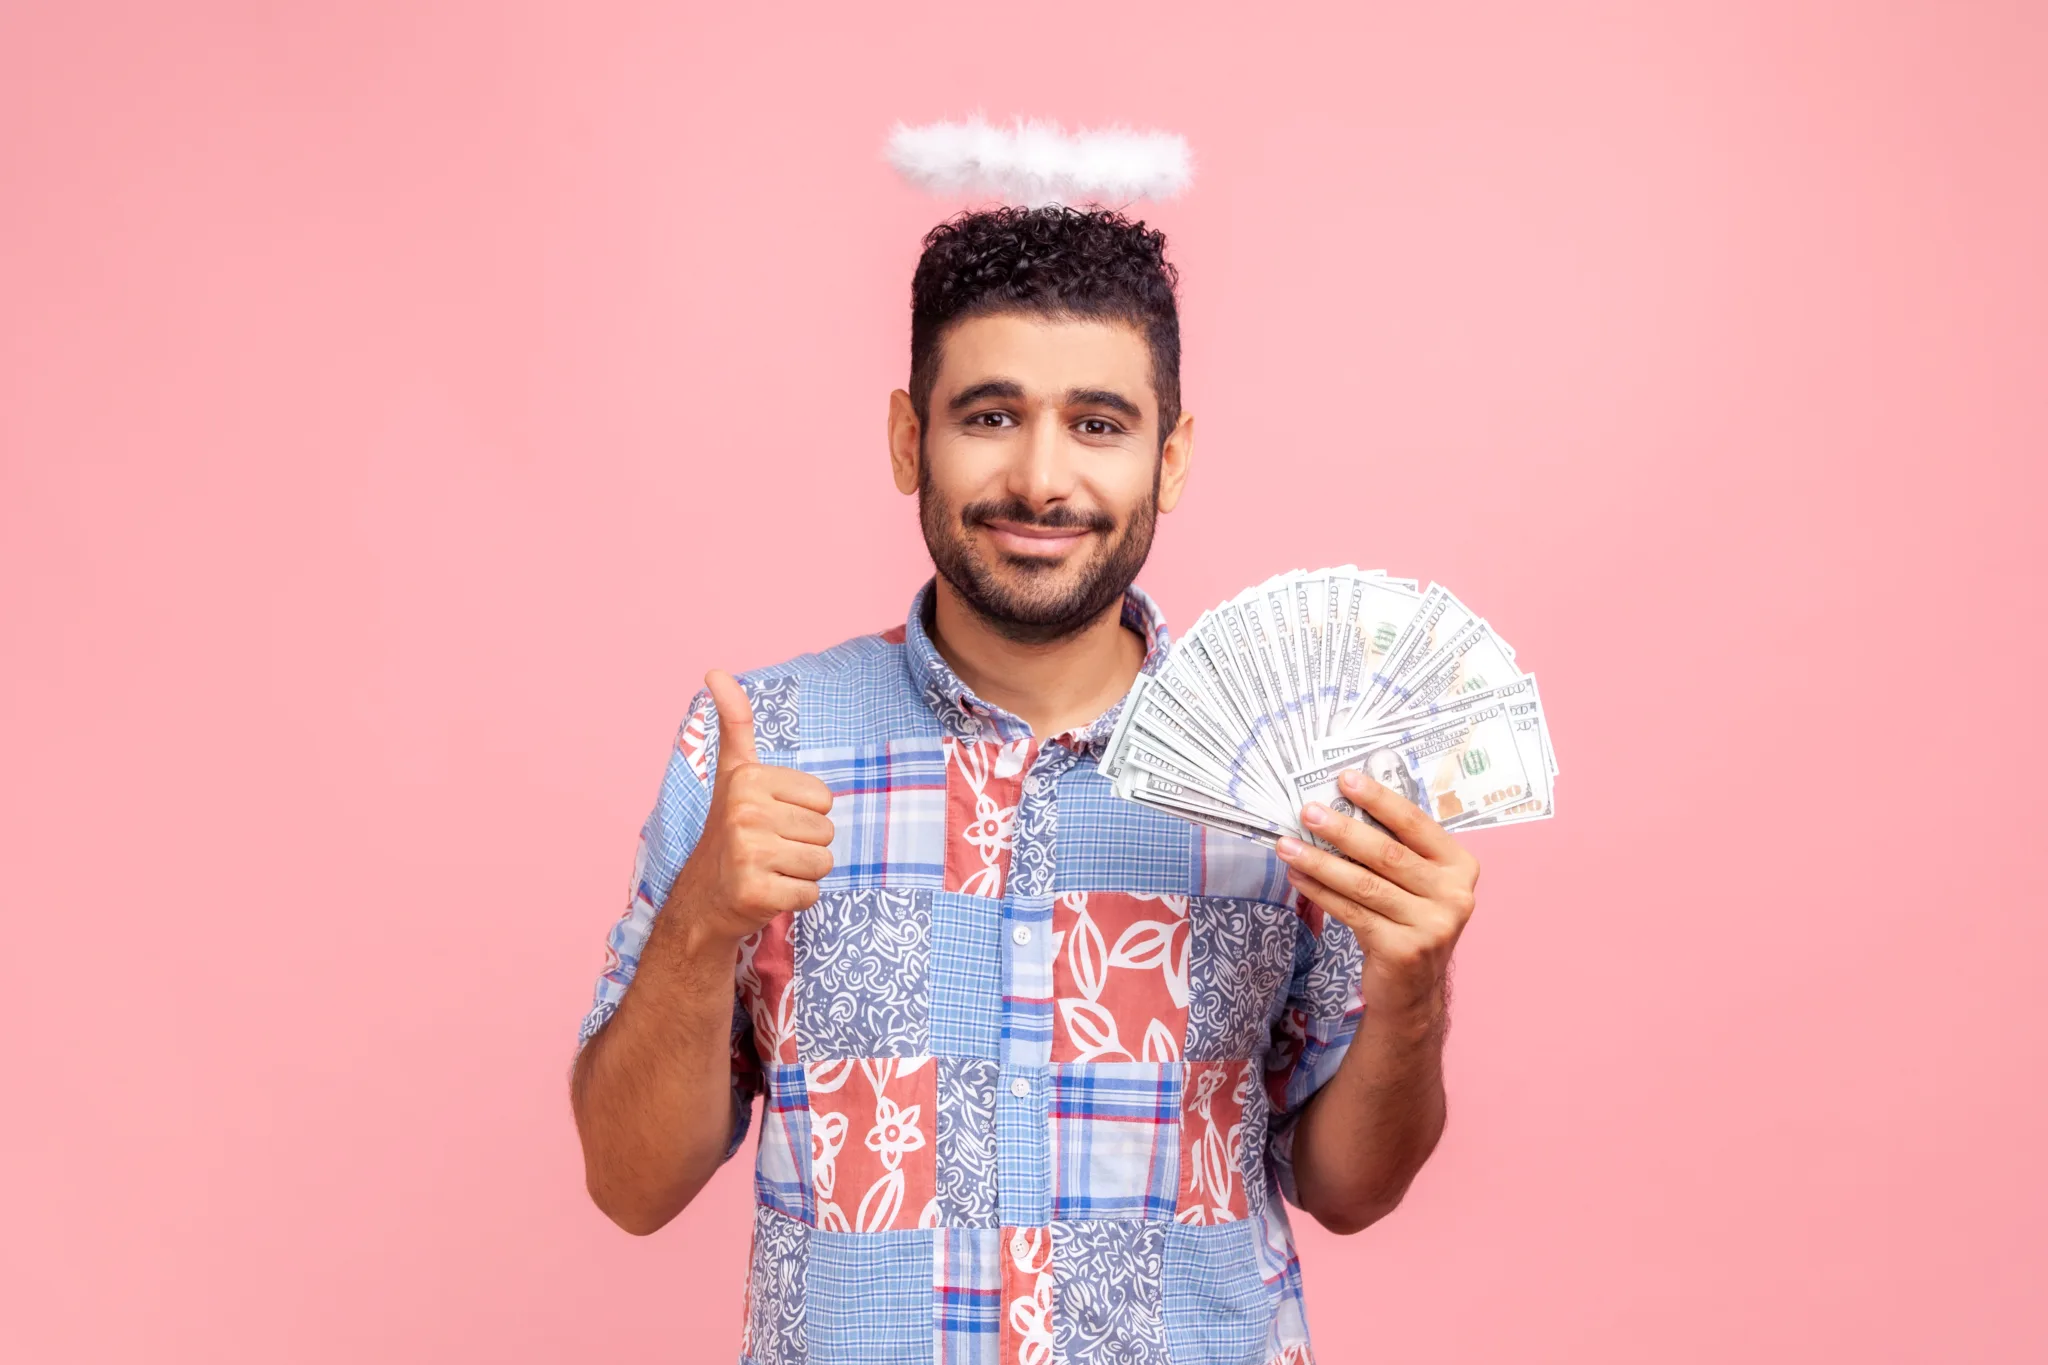 Smiling positive man with beard wearing blue casual style shirt with nimbus on head holding dollars banknotes and showing thumb up.